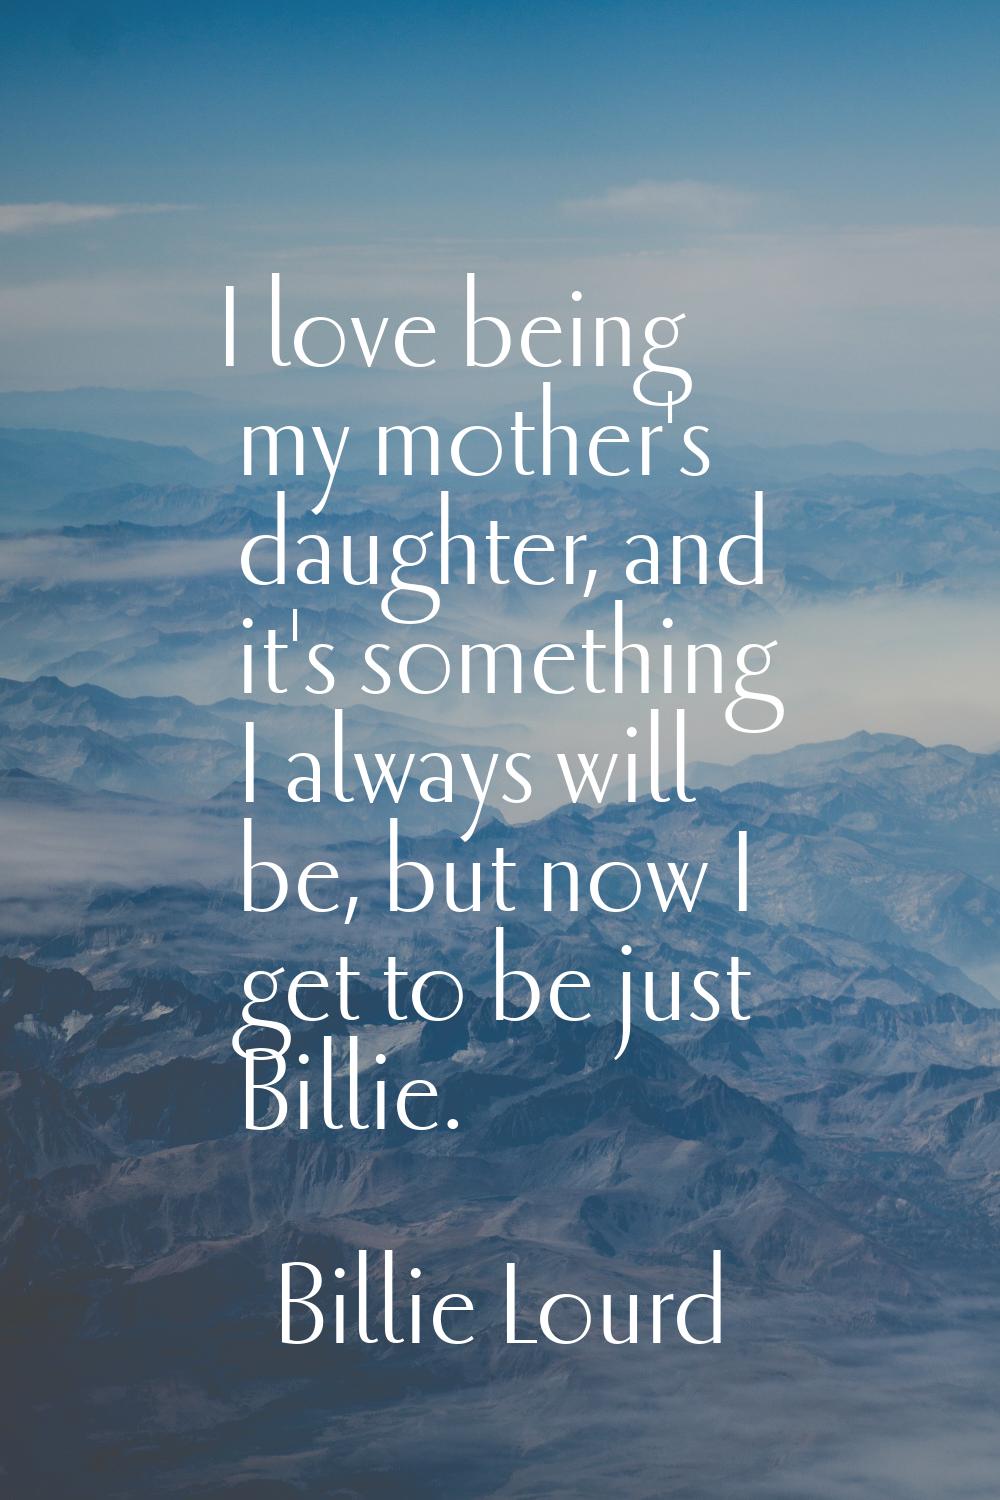 I love being my mother's daughter, and it's something I always will be, but now I get to be just Bi